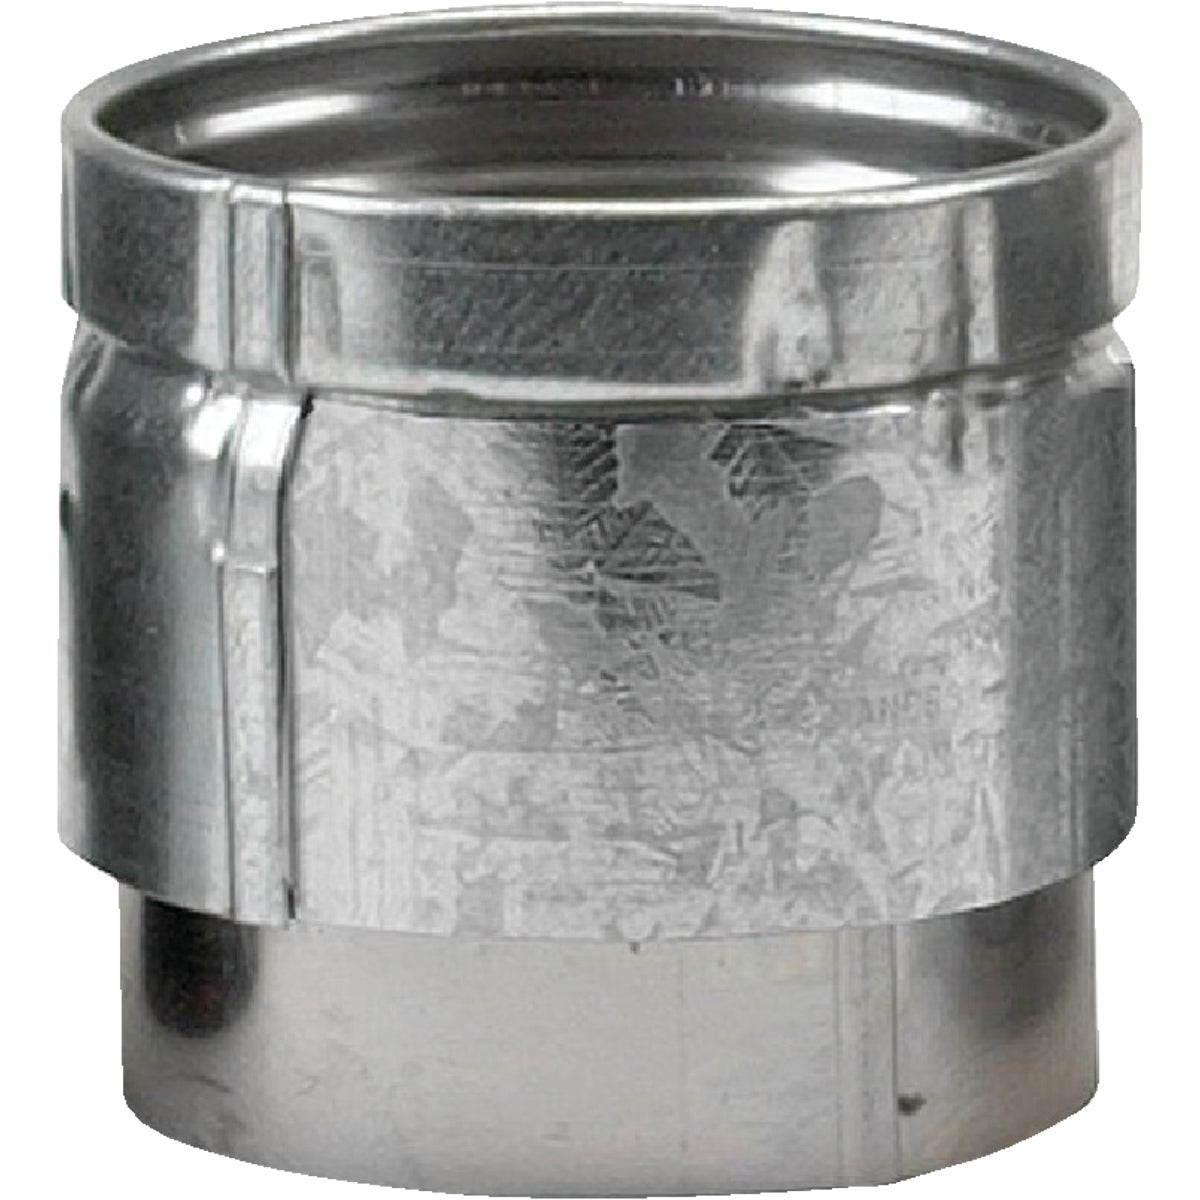 Item 406406, 3" pipe connector. Type L insulated pipe for pellet stove applications.